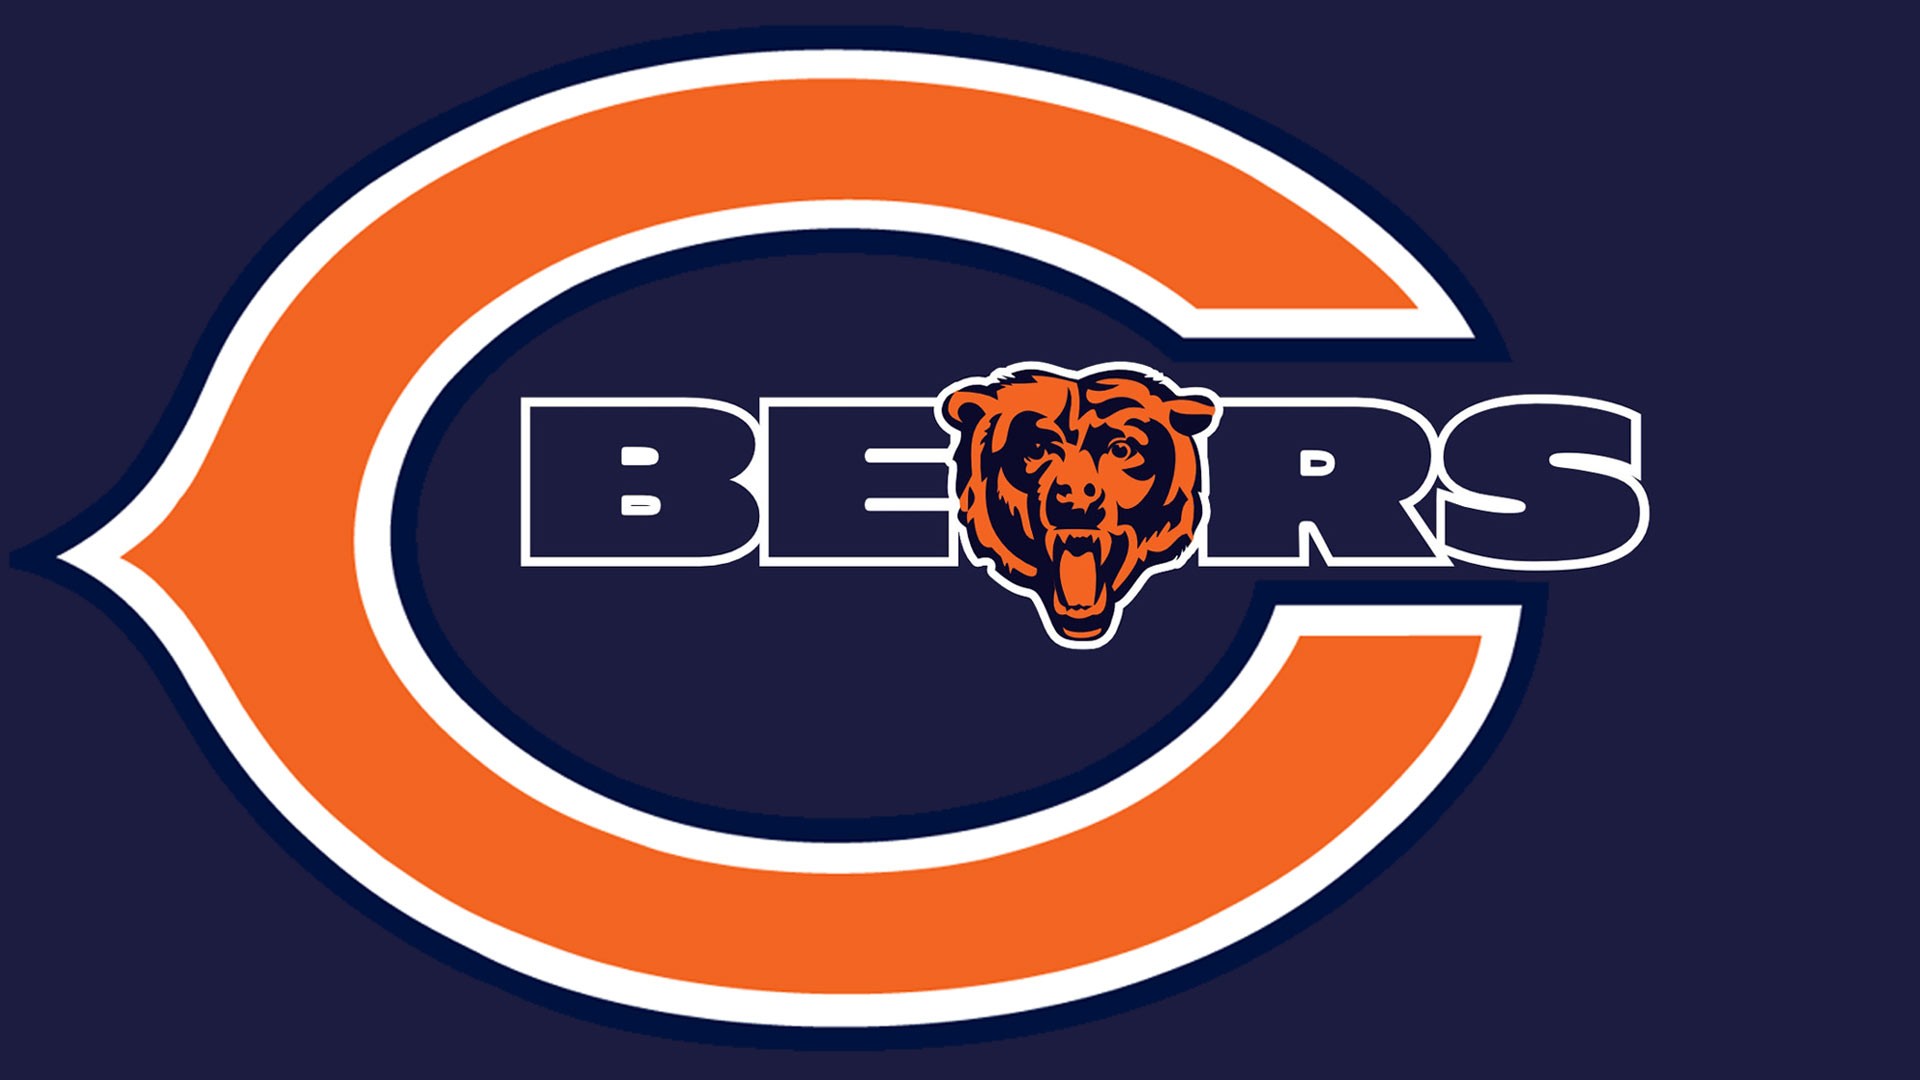 Chicago Bears Wallpaper With Resolution 1920X1080